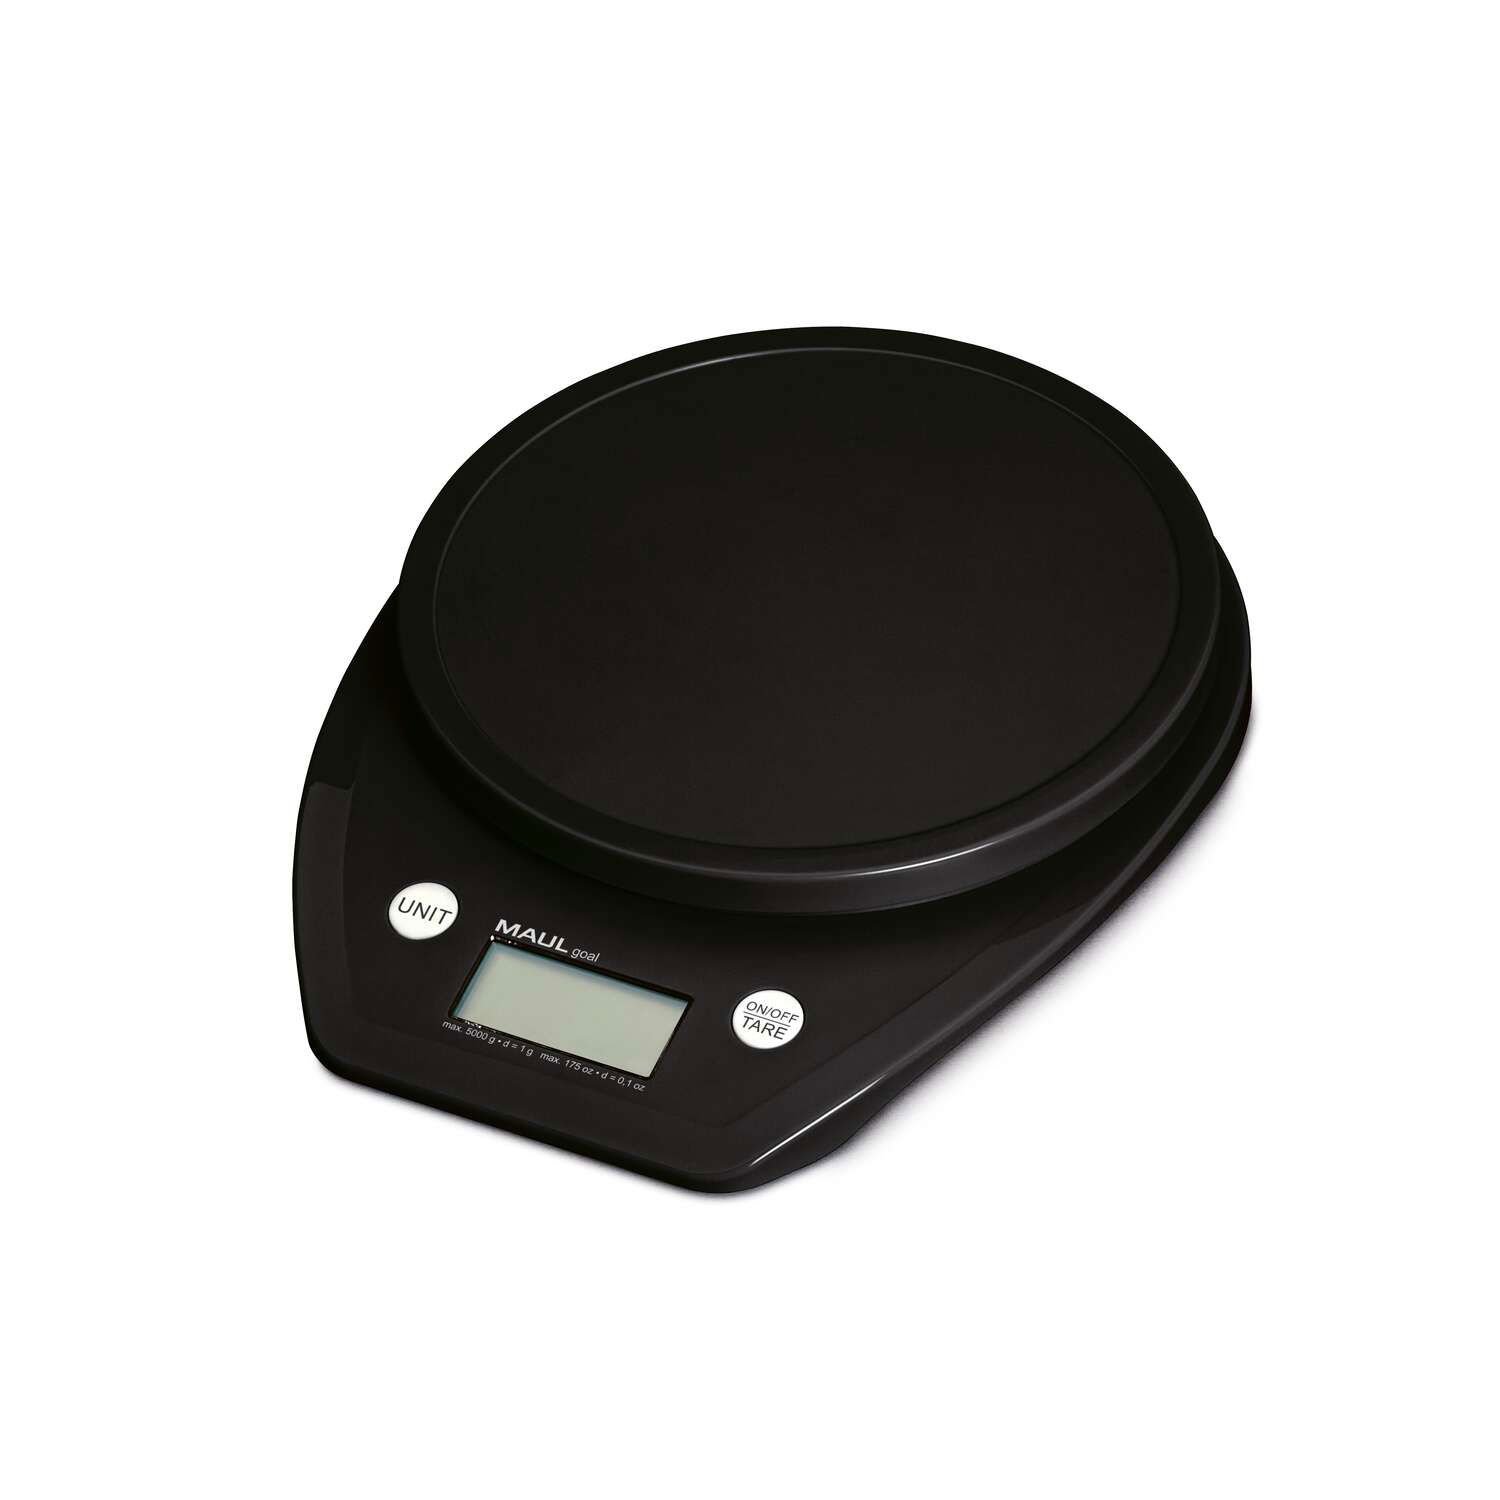 Briefwaage MAULgoal mit Batterie, 5000 g